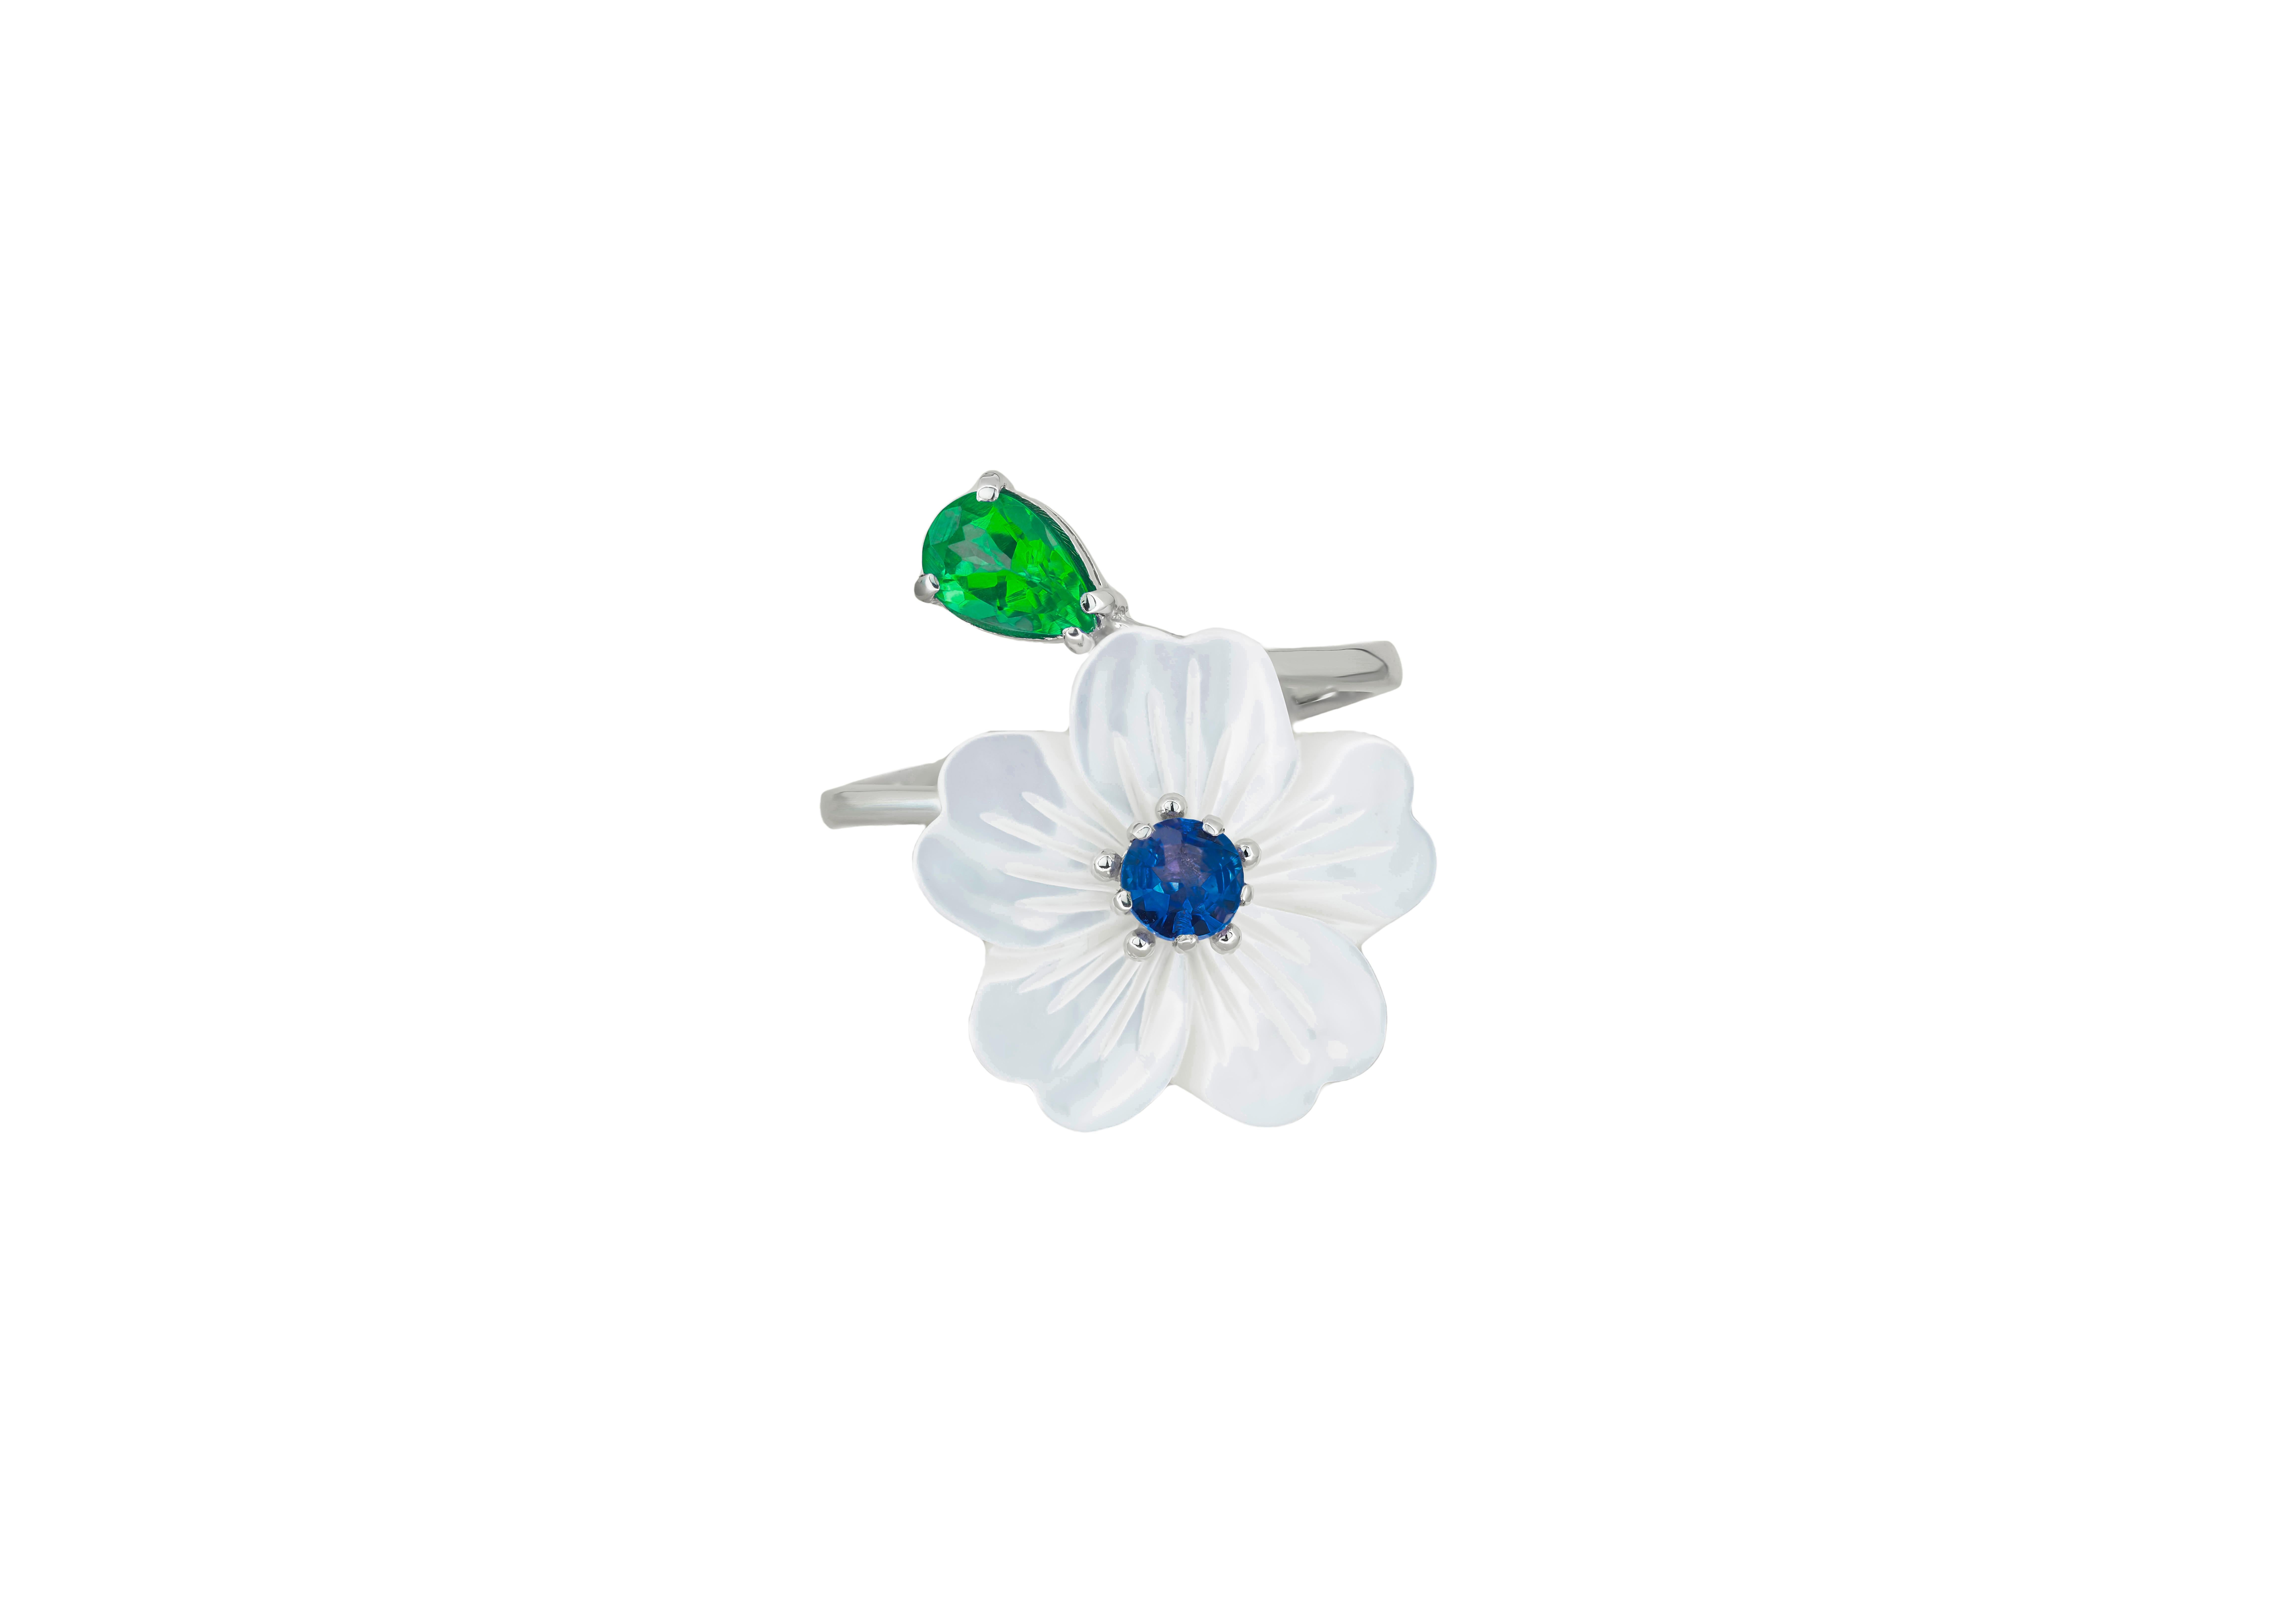 Women's Carved Flower 14k ring with gemstones. For Sale